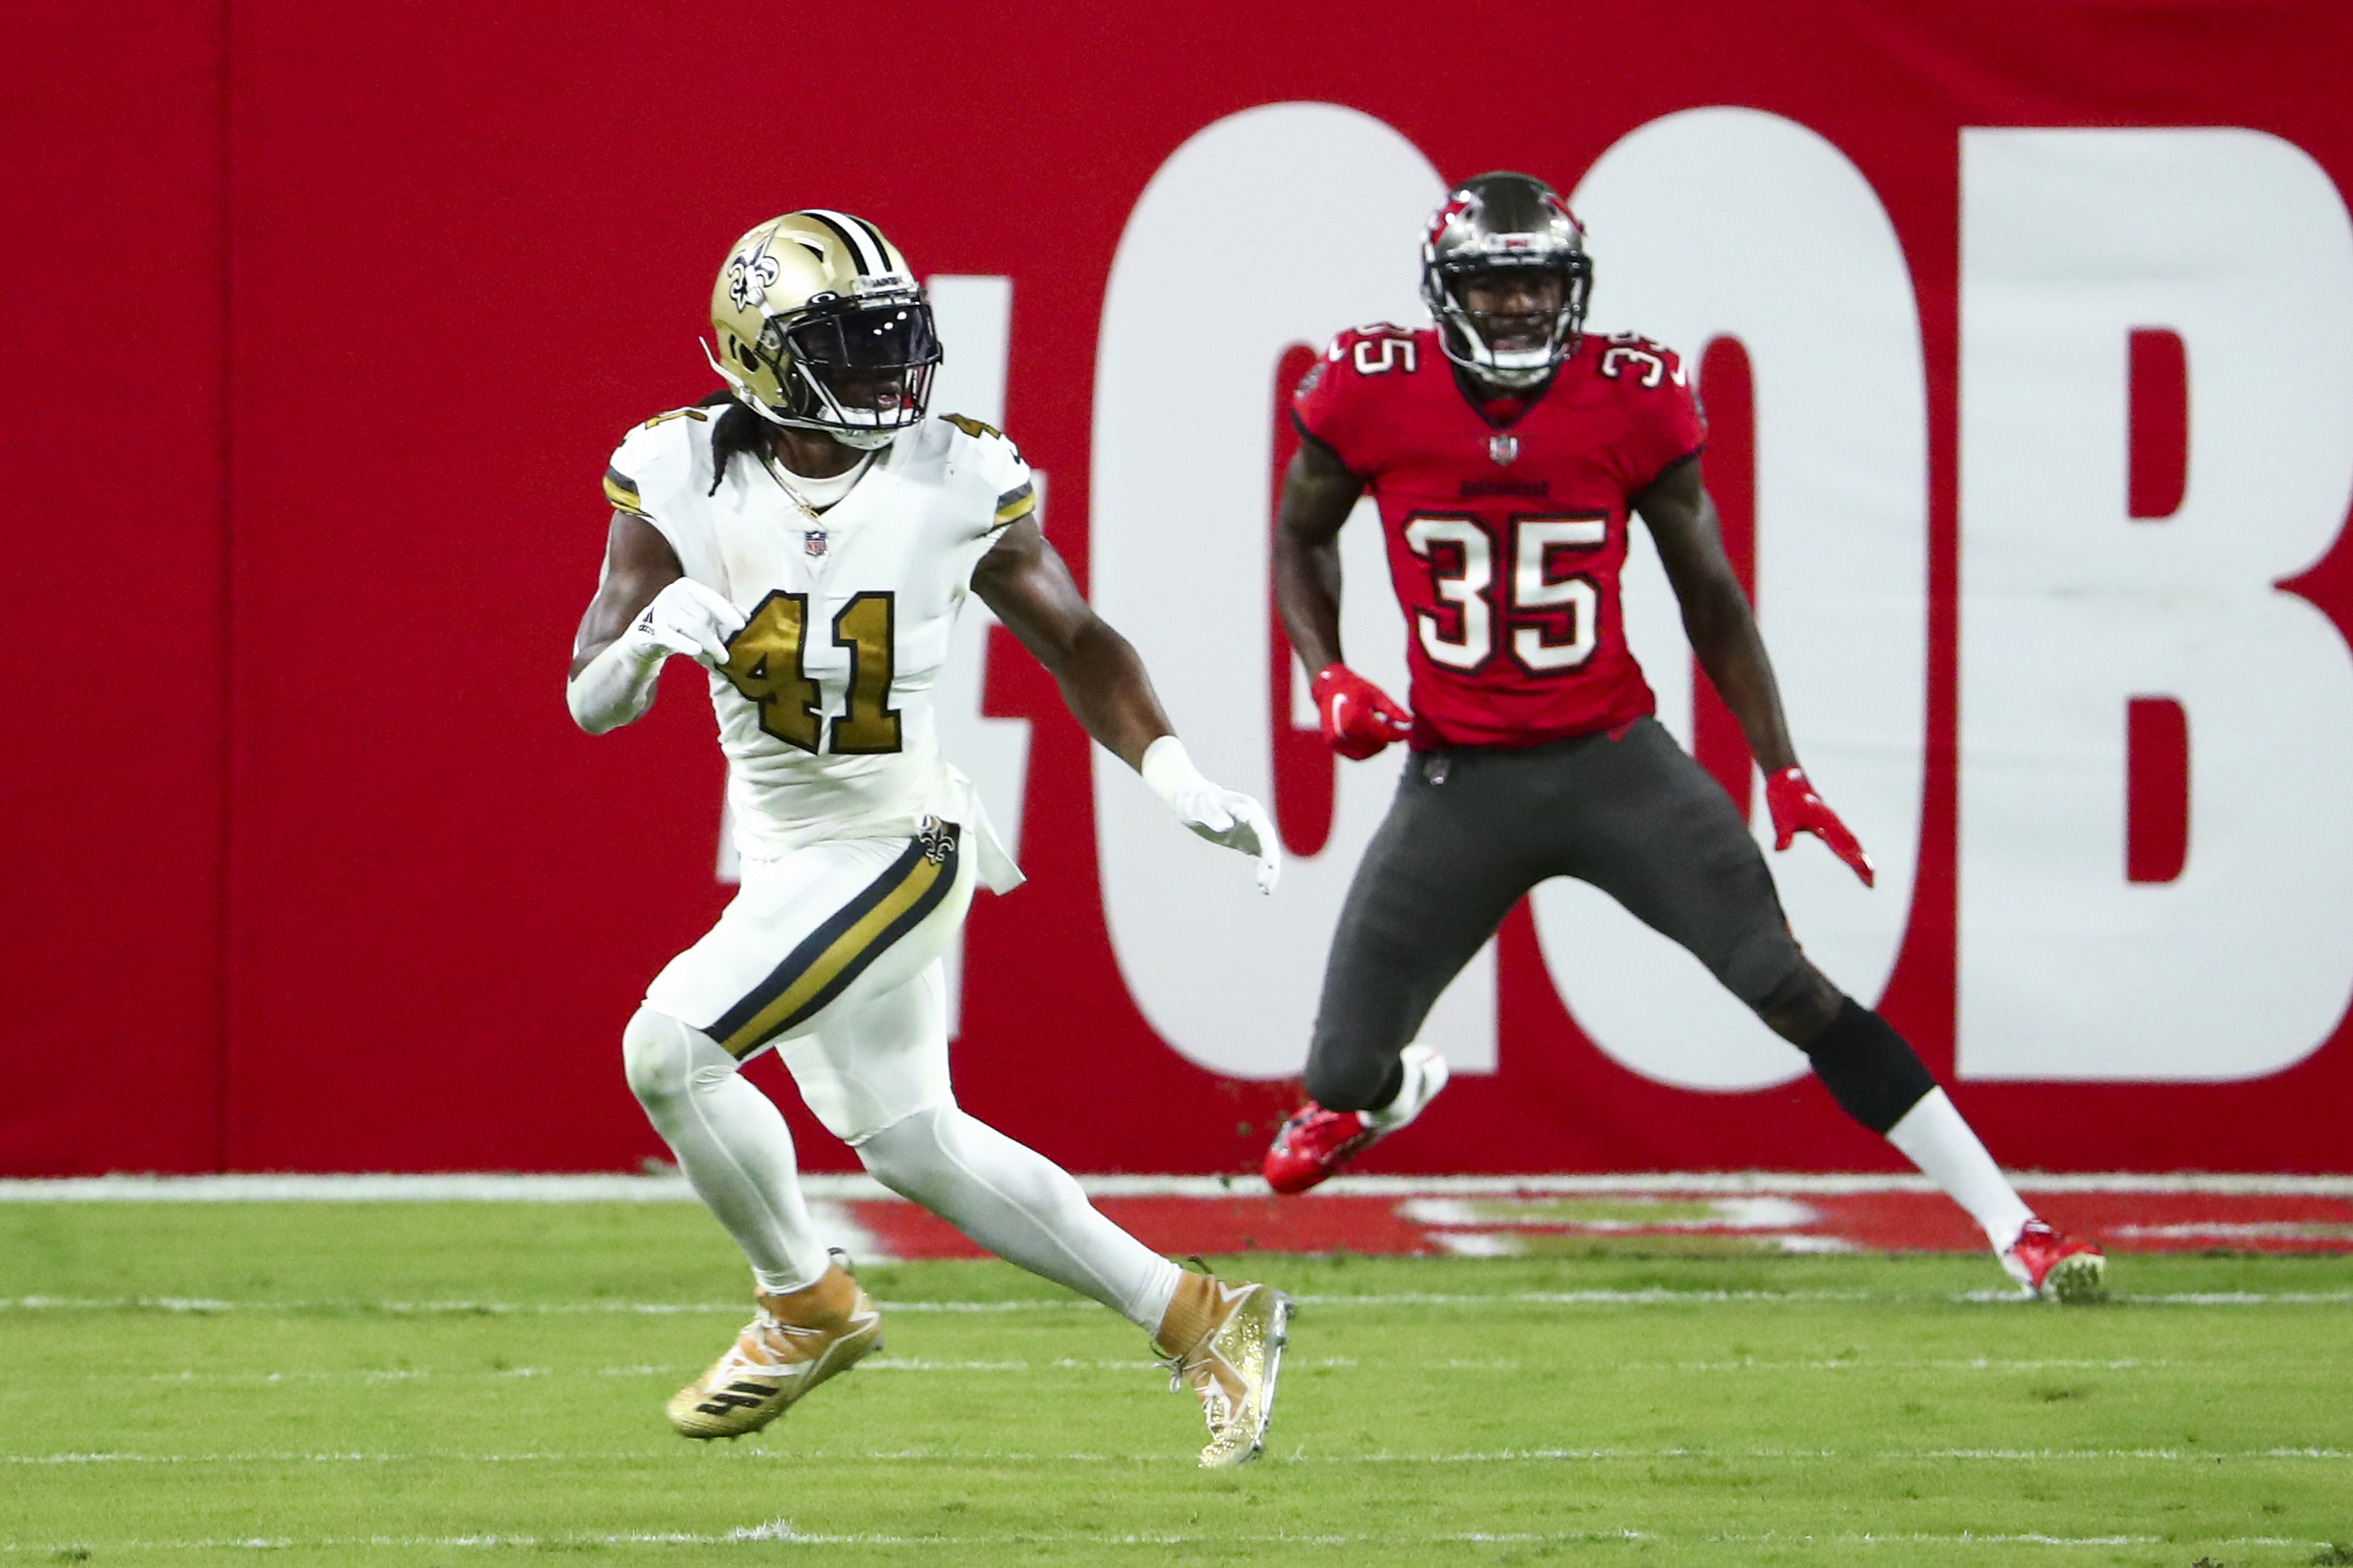 FanDuel - Who wins the NFC South? The Buccaneers lead the